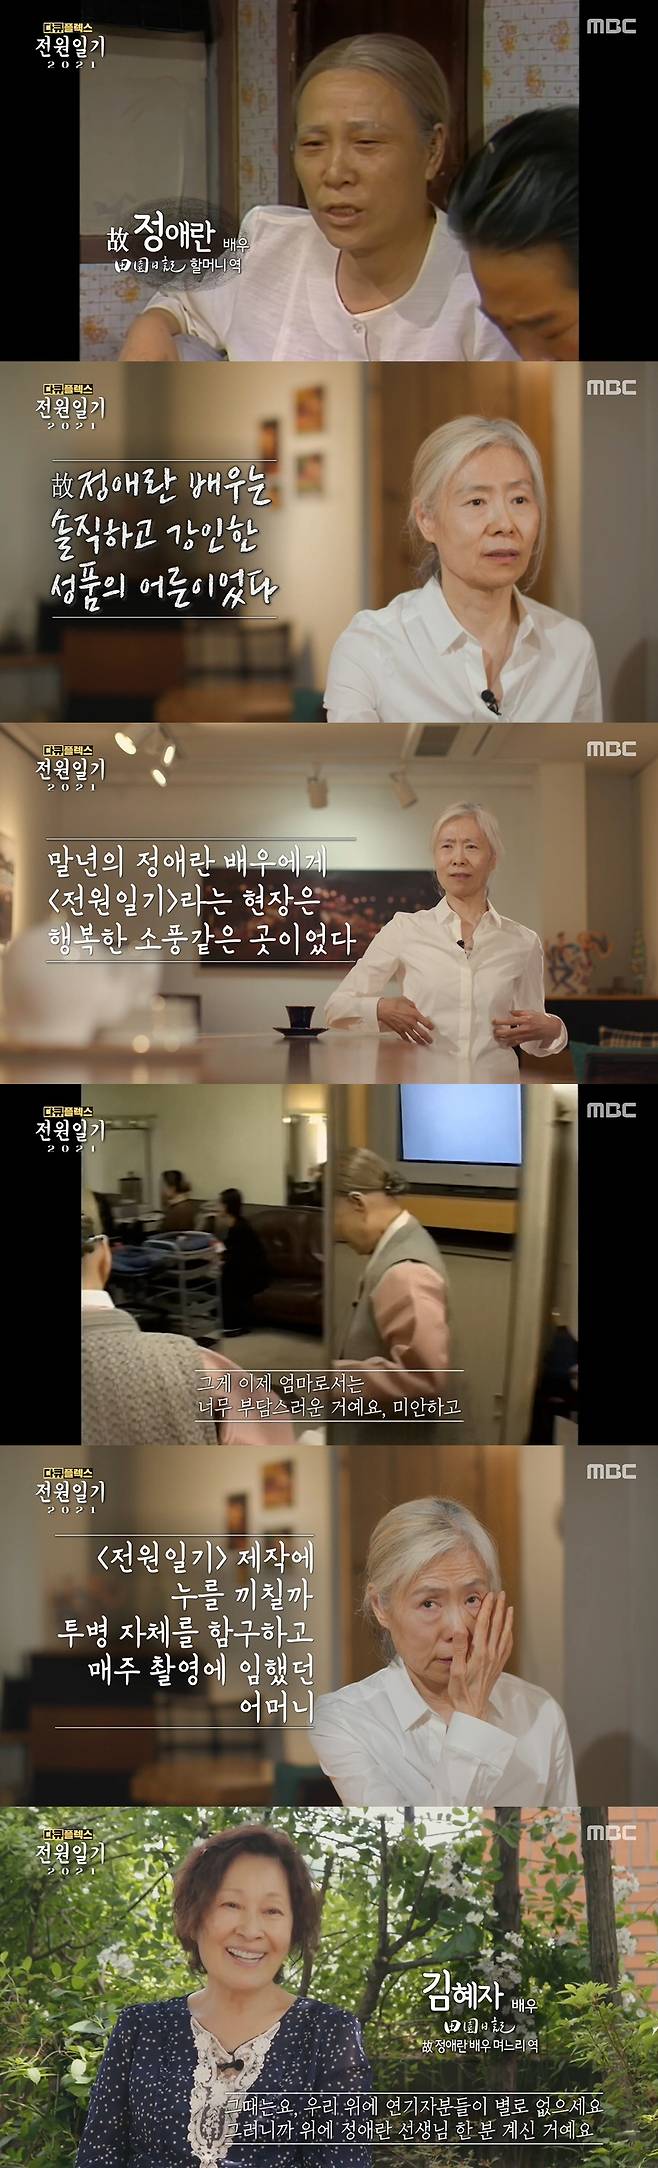 In Power Diary 2021, I remembered the late Ae-ran Jeong Actor.On the 25th, MBCs 60th anniversary special feature Document Flex - Power Diary 2021 Part 2 Spring Day Goes had a time to remember the late Ae-ran Jeong Actor, who was a big adult.The cast of the Power Diary said that they recalled the late Ae-ran Jeong, who was the laughingest person in the news of the reunion in 20 years.Actor Ye Soo-jung, daughter of the late Ae-ran Jeong, conveyed Ae-ran Jeongs special affection for the power diary.I went to the market before James Stewart recorded Power Diary.It was important to pack a Lunch box to eat with my colleagues. I understand because I am this old. How good it is to eat with my juniors.So, if you go out and buy the ingredients and go with the Lunch box, I remember that you were happy as if you were going to go out on a picnic.I think that was affection, she recalled.Ae-ran Jeong was reported to have had a different affection for power diary so that he participated in the recording even during the lung cancer battle until the end of power diary in 2002.I did not tell my family about lung cancer to work, said Ye Soo-jung, when I was in Germany with my family, I did not tell them that I had lung cancer.My mother-in-law saw the news of lung cancer in the newspaper and I got to know it by calling (me) internationally. I was so strong that I had to work without anyone knowing later, so I was hospitalized for two nights and three days without Guardian.At first, the production team and colleagues would not have known, he said.Ae-ran Jeong, who said his life was a wish to hold on until the end of the power diary, died three years after the end of the power diary.On that day, Kim (Choi Bul-am) and his three daughters-in-law visited where Ae-ran Jeong fell asleep.We will always try to live like that while we are always engraving our grandmothers image on our hearts, he said.Ye Soo-jung said, I am glad that the background is family and power diary. My children did not do it.